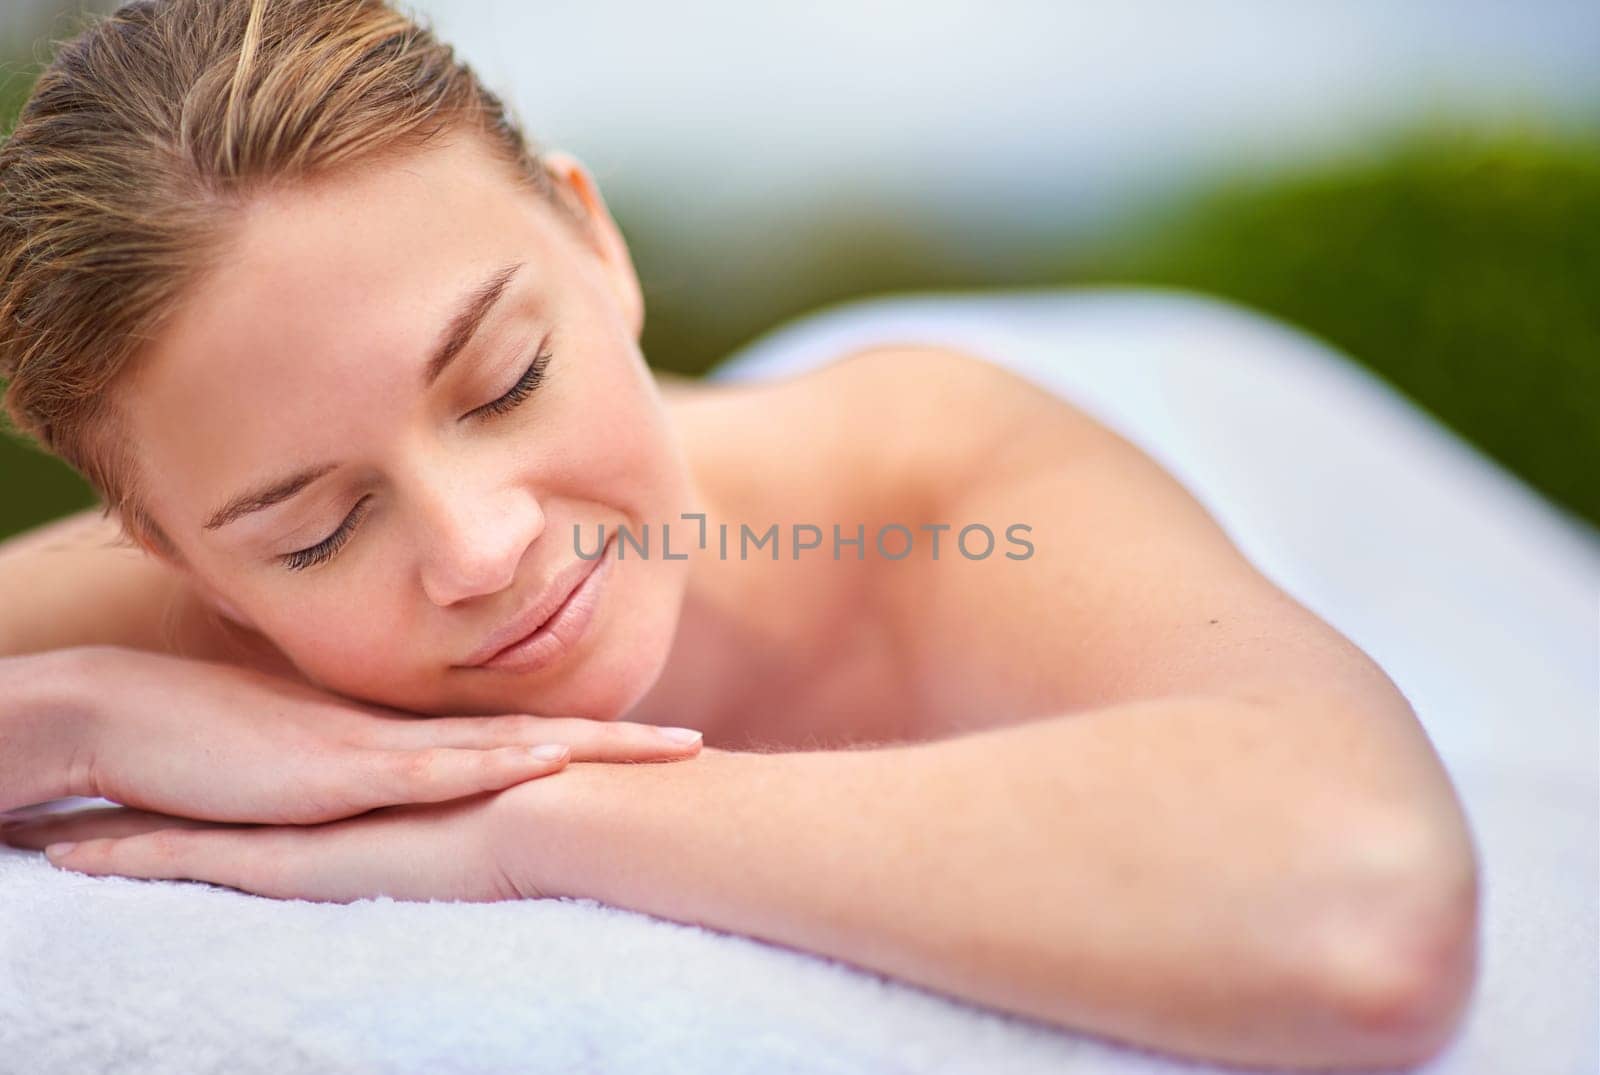 Massage, woman and spa for health, wellness and happiness in zen, peace and healing for self care. Female person, aromatherapy and detox for body with smile, calm and relaxation on vacation in Bali.